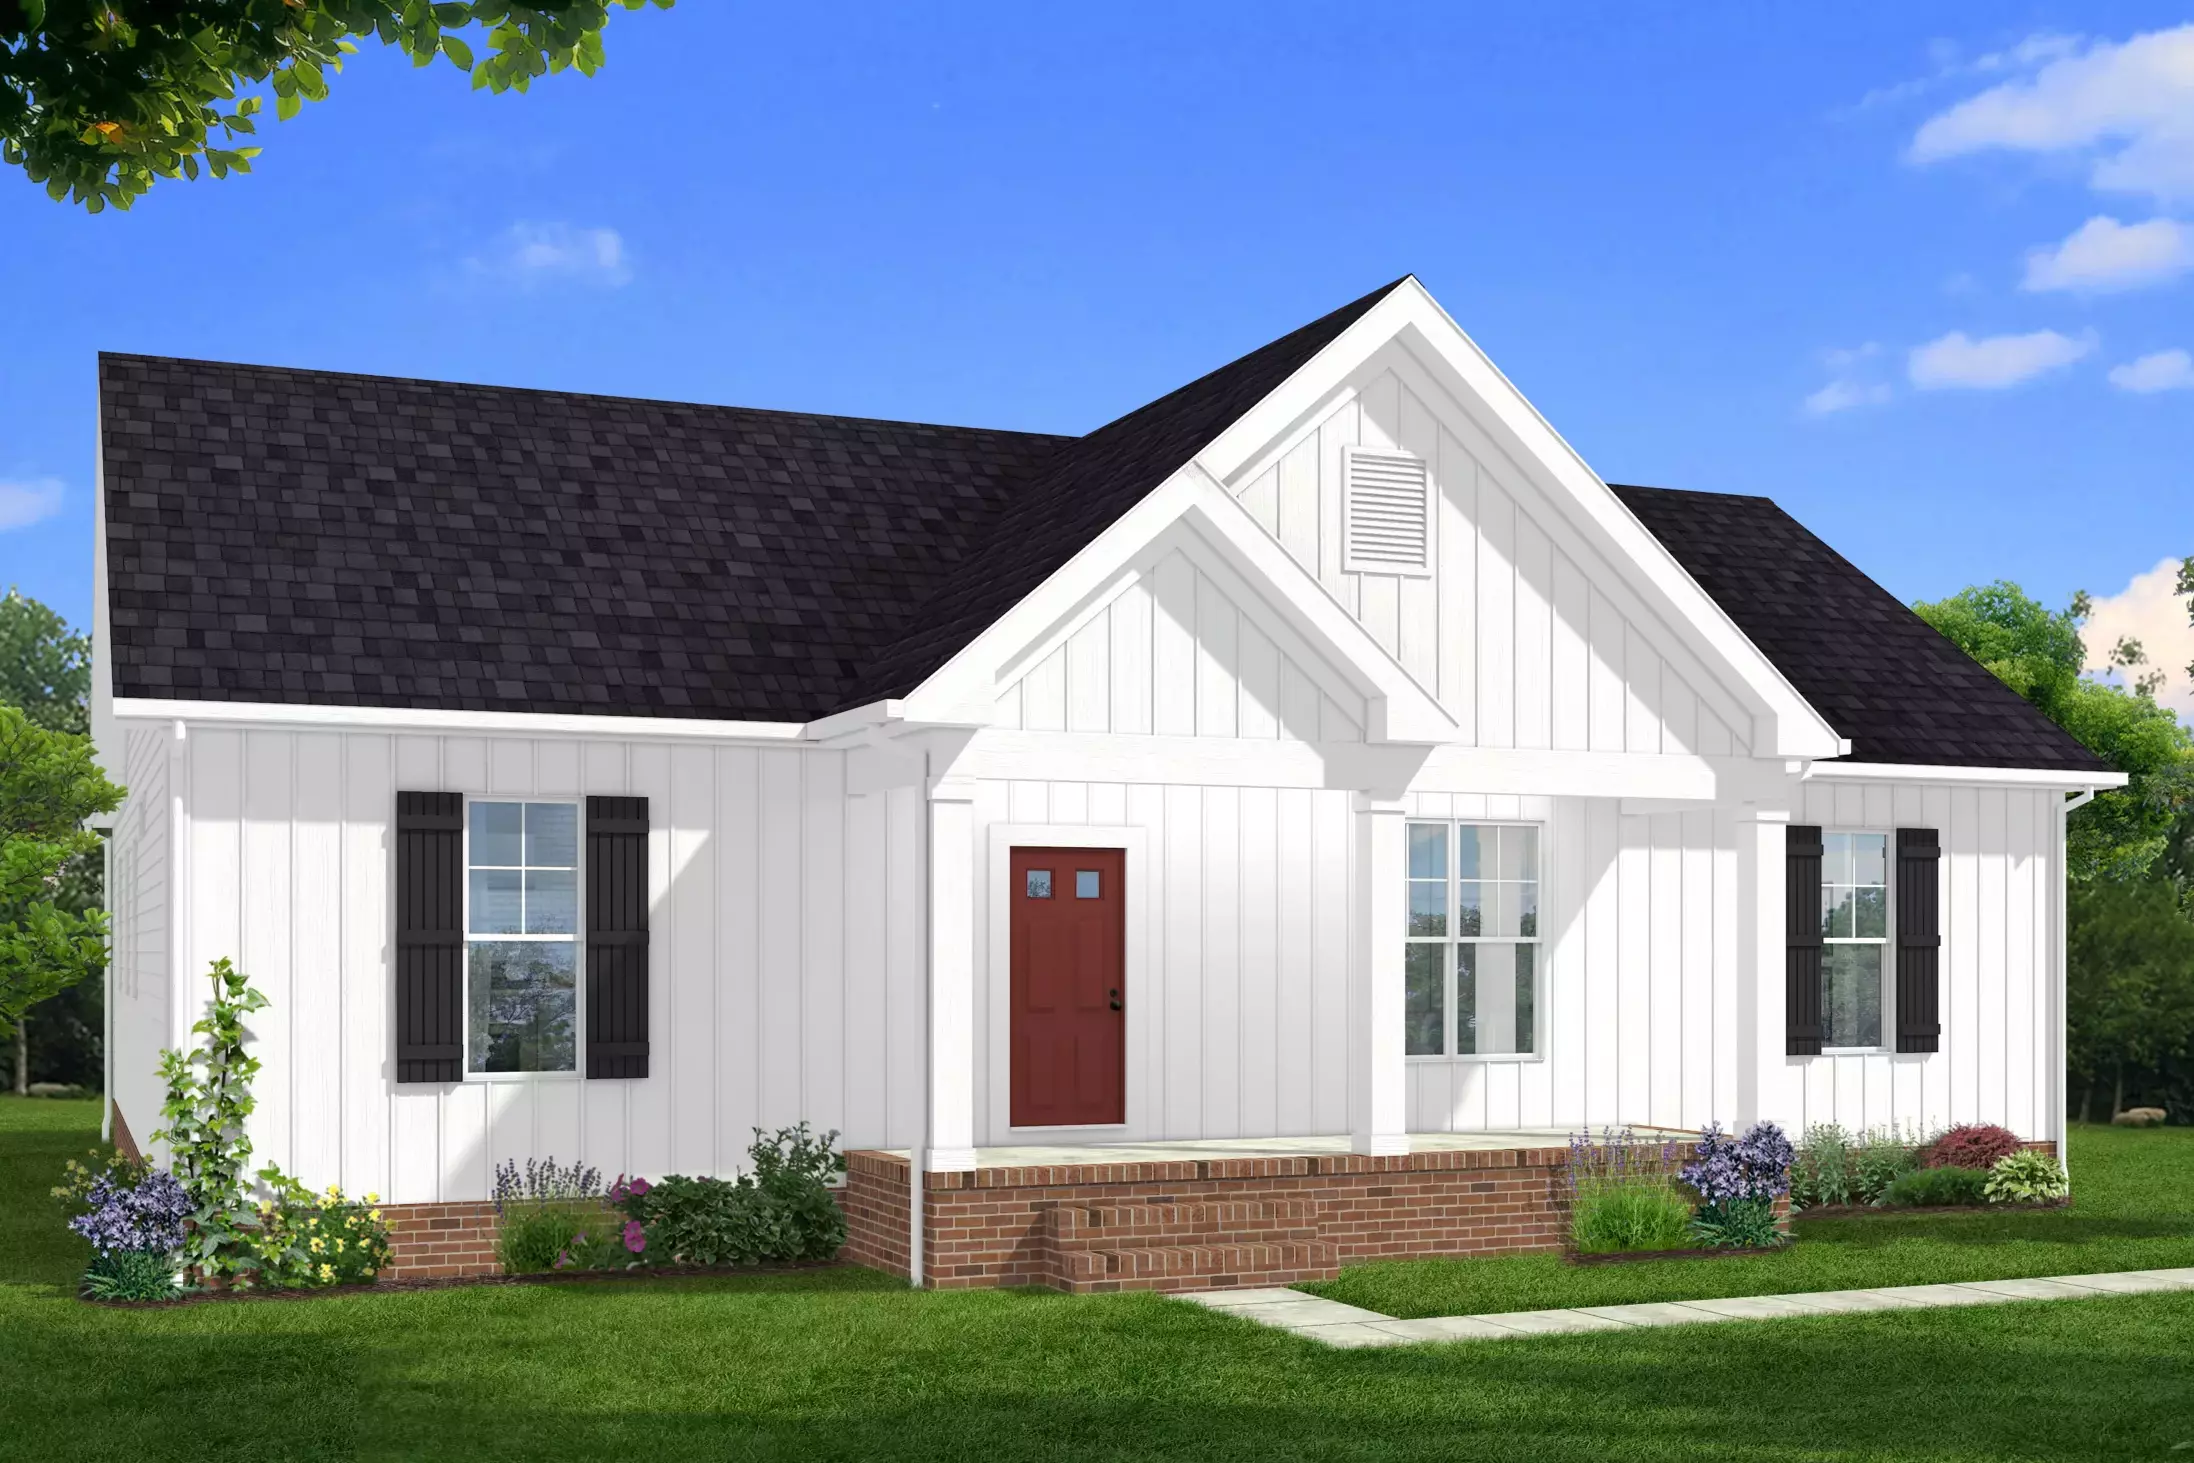 Rendering Forest Ridge Lot 75.10.17.22 Scaled Uai 2194x1463 1, Rock River Homes